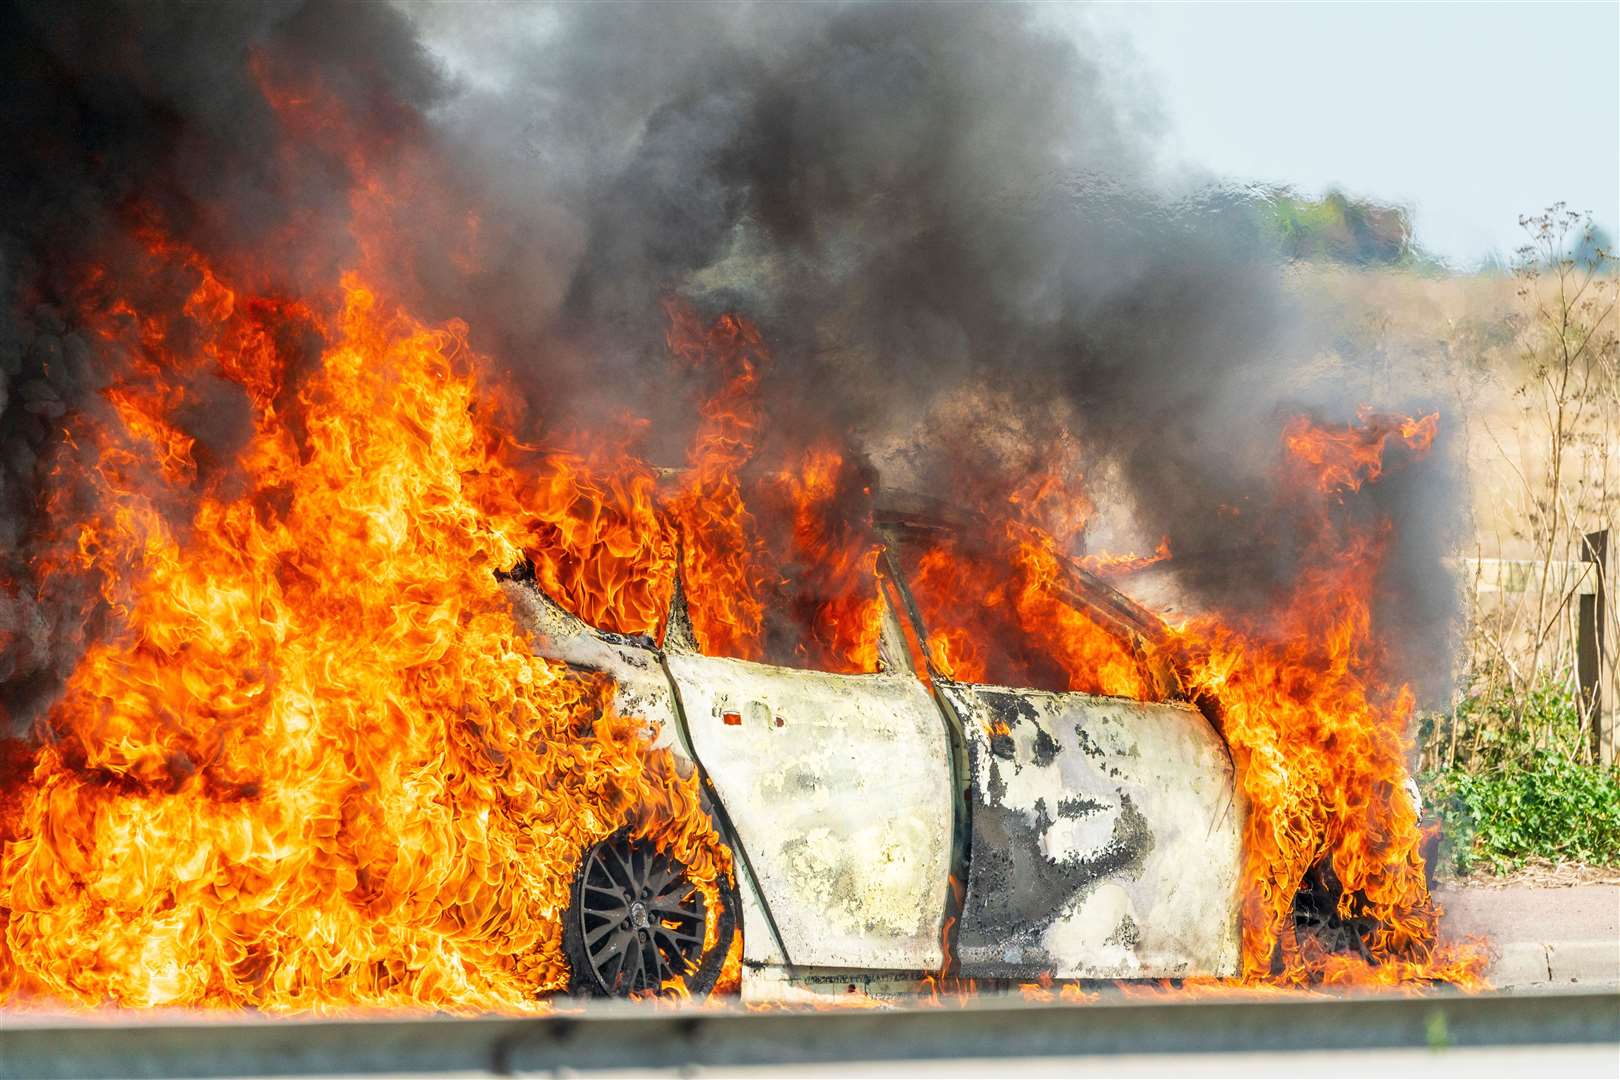 A picture of the car alight shows huge plumes of thick smoke filling the air. Credit: Malcolm Fairman/Alamy Live News